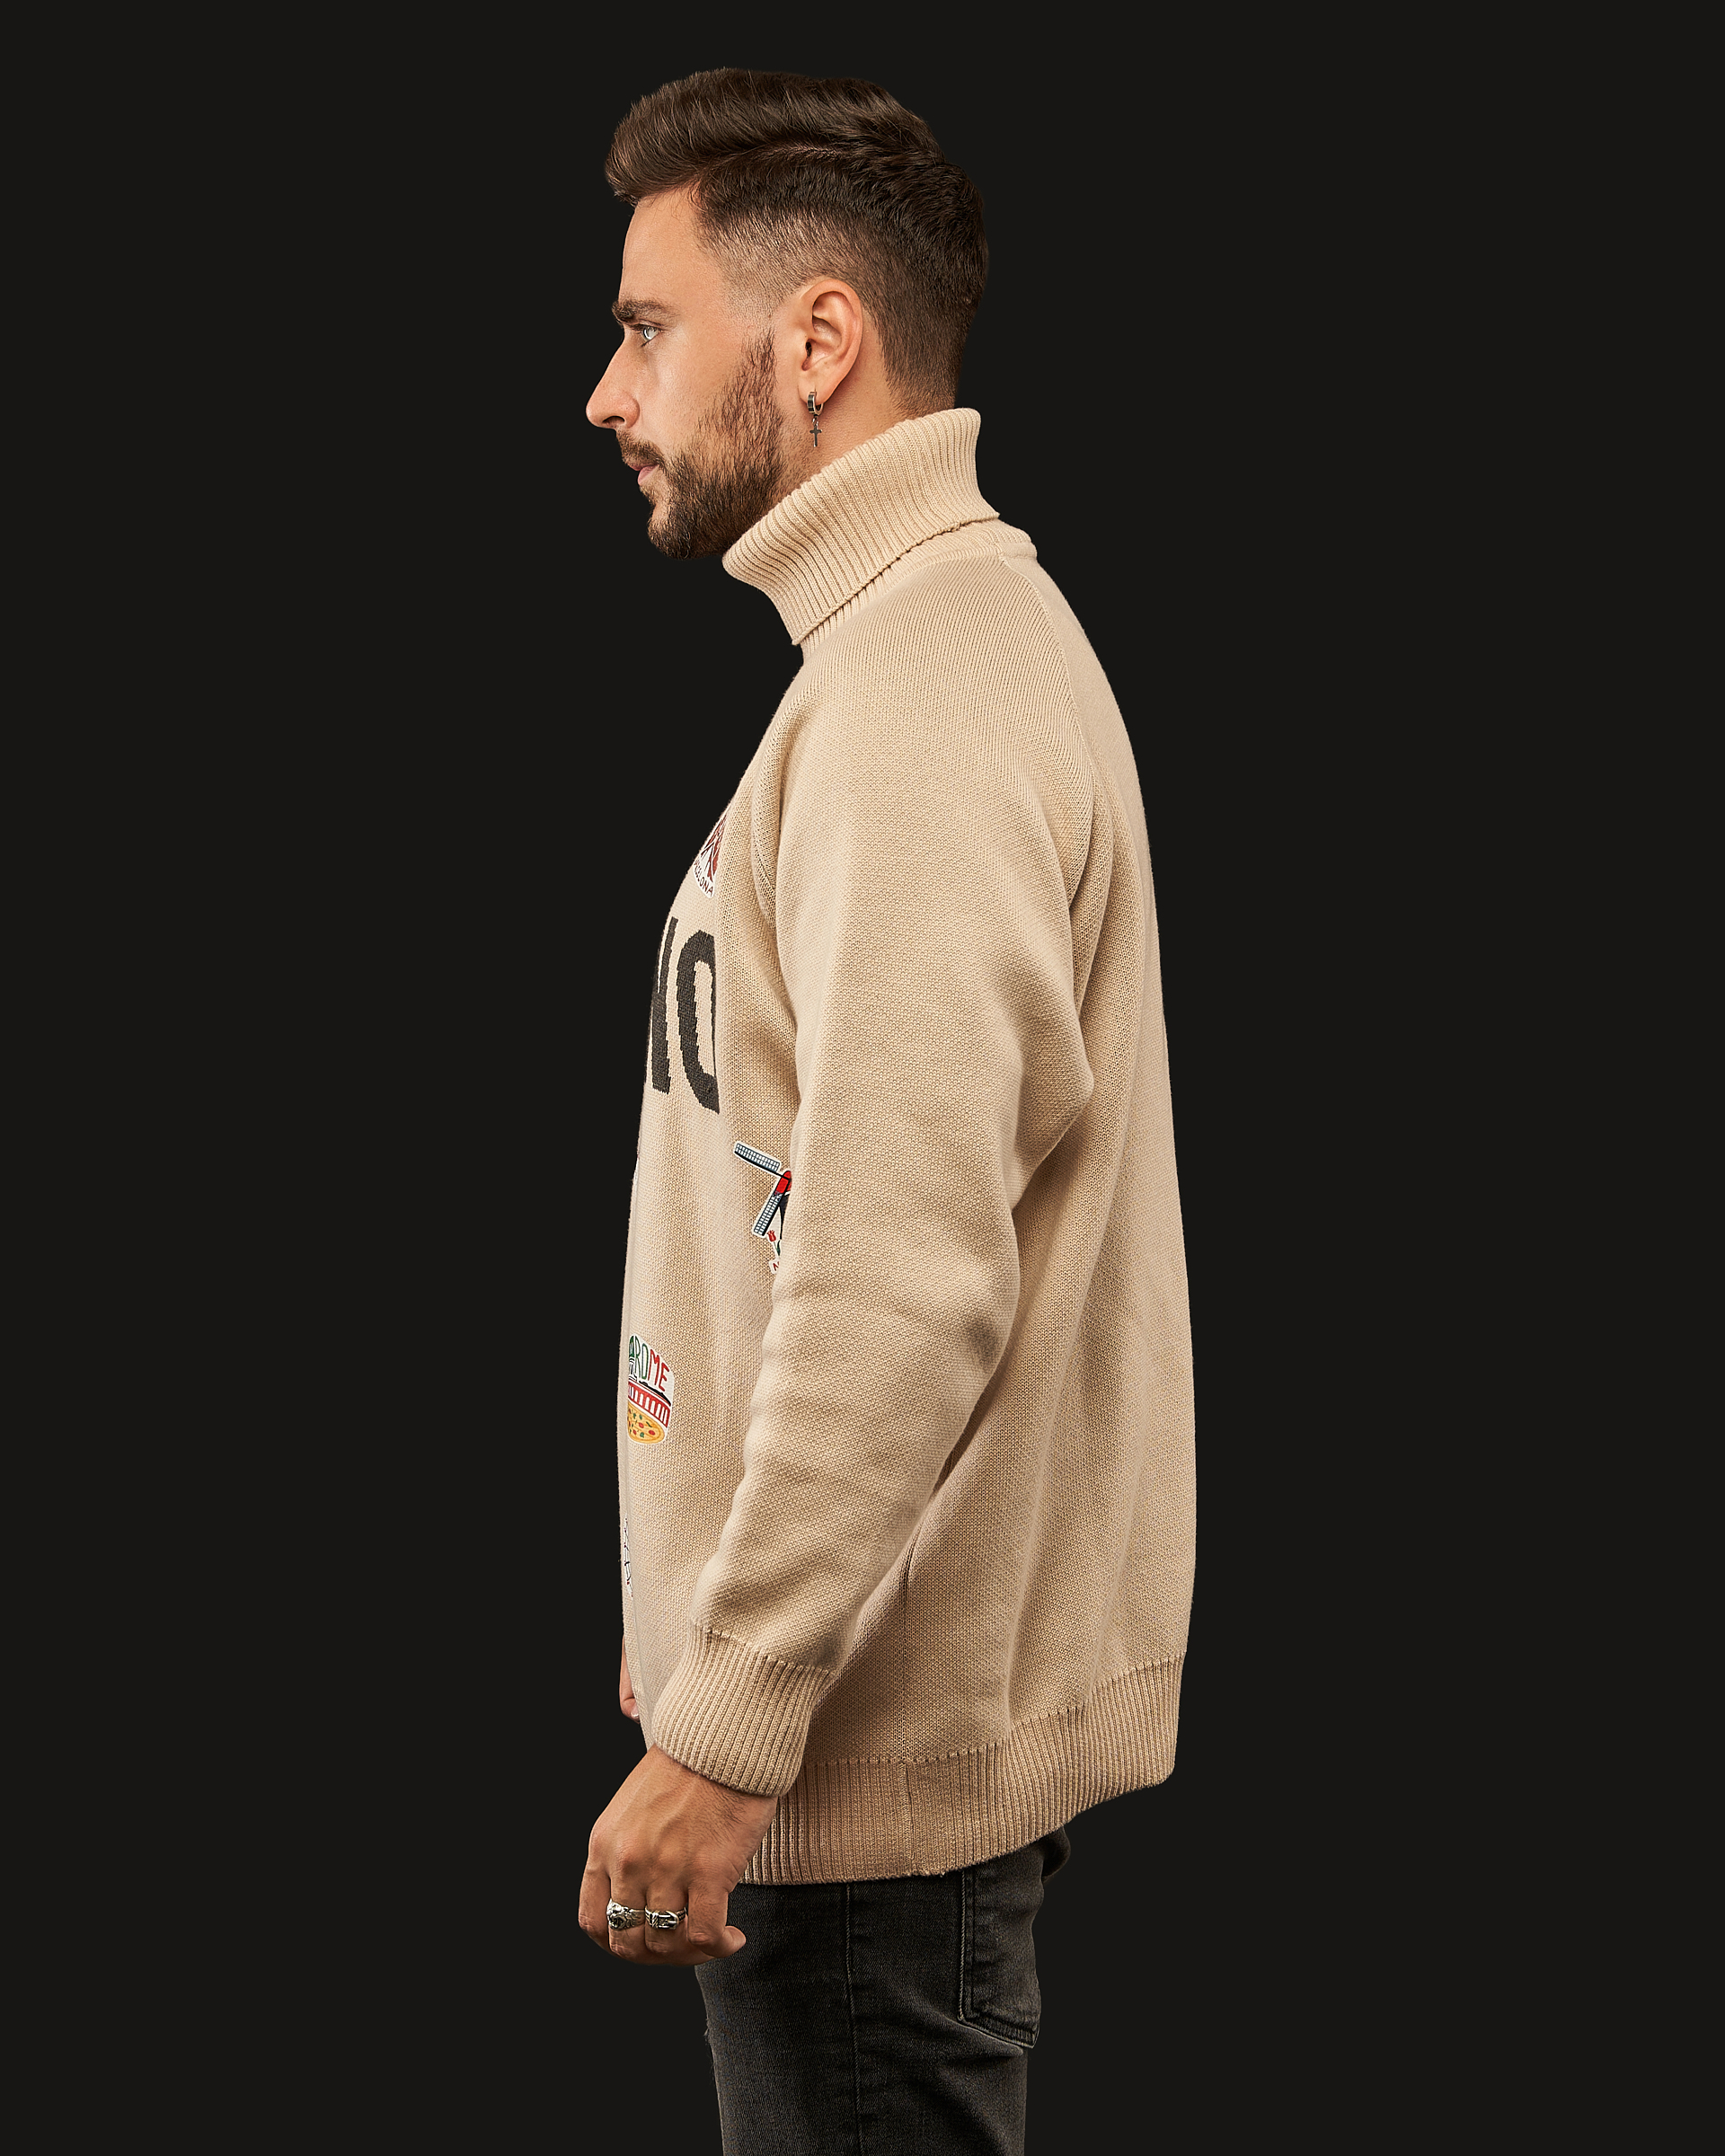 Pullover (beige) Image: https://ohueno-official.com/wp-content/uploads/m01949-1.jpg